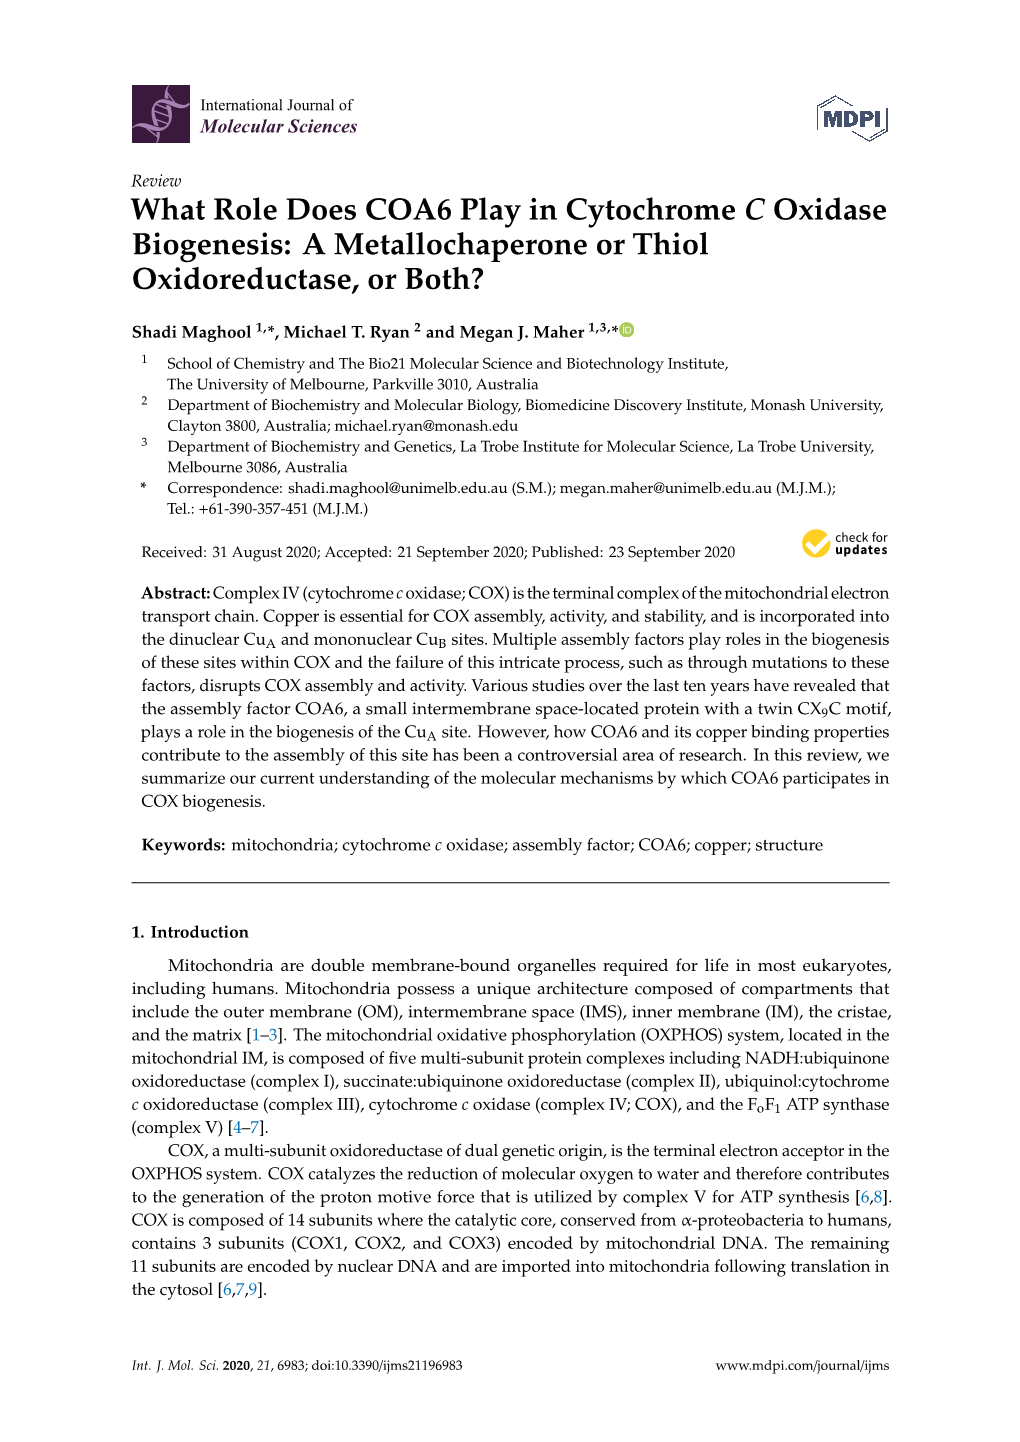 What Role Does COA6 Play in Cytochrome C Oxidase Biogenesis: a Metallochaperone Or Thiol Oxidoreductase, Or Both?